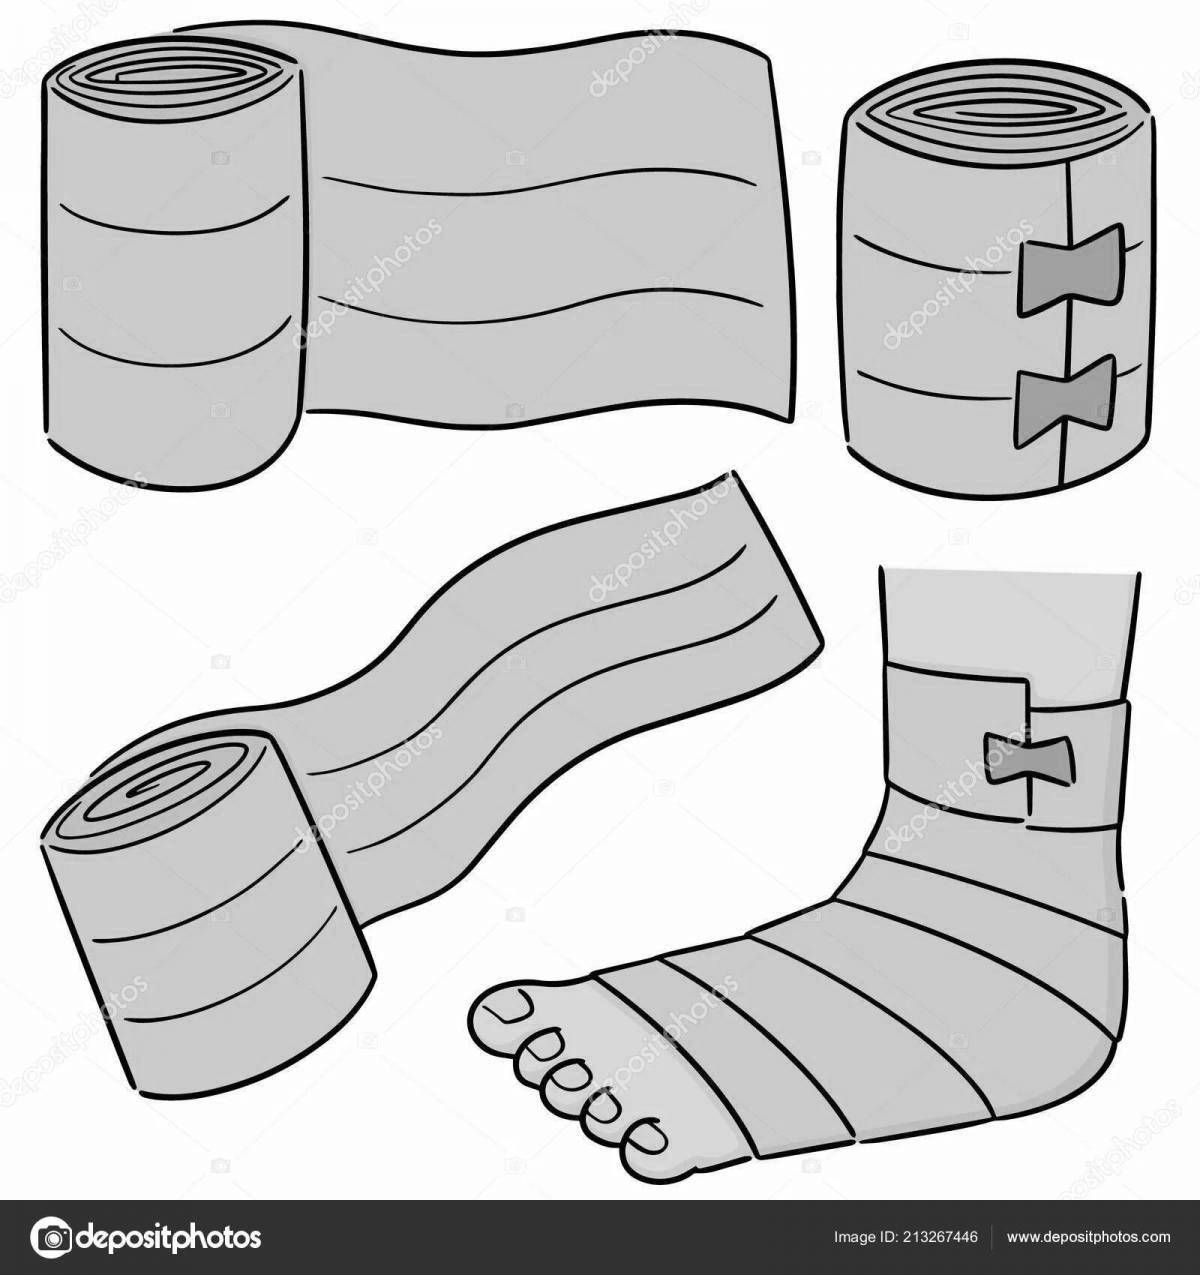 Attractive bandage coloring page